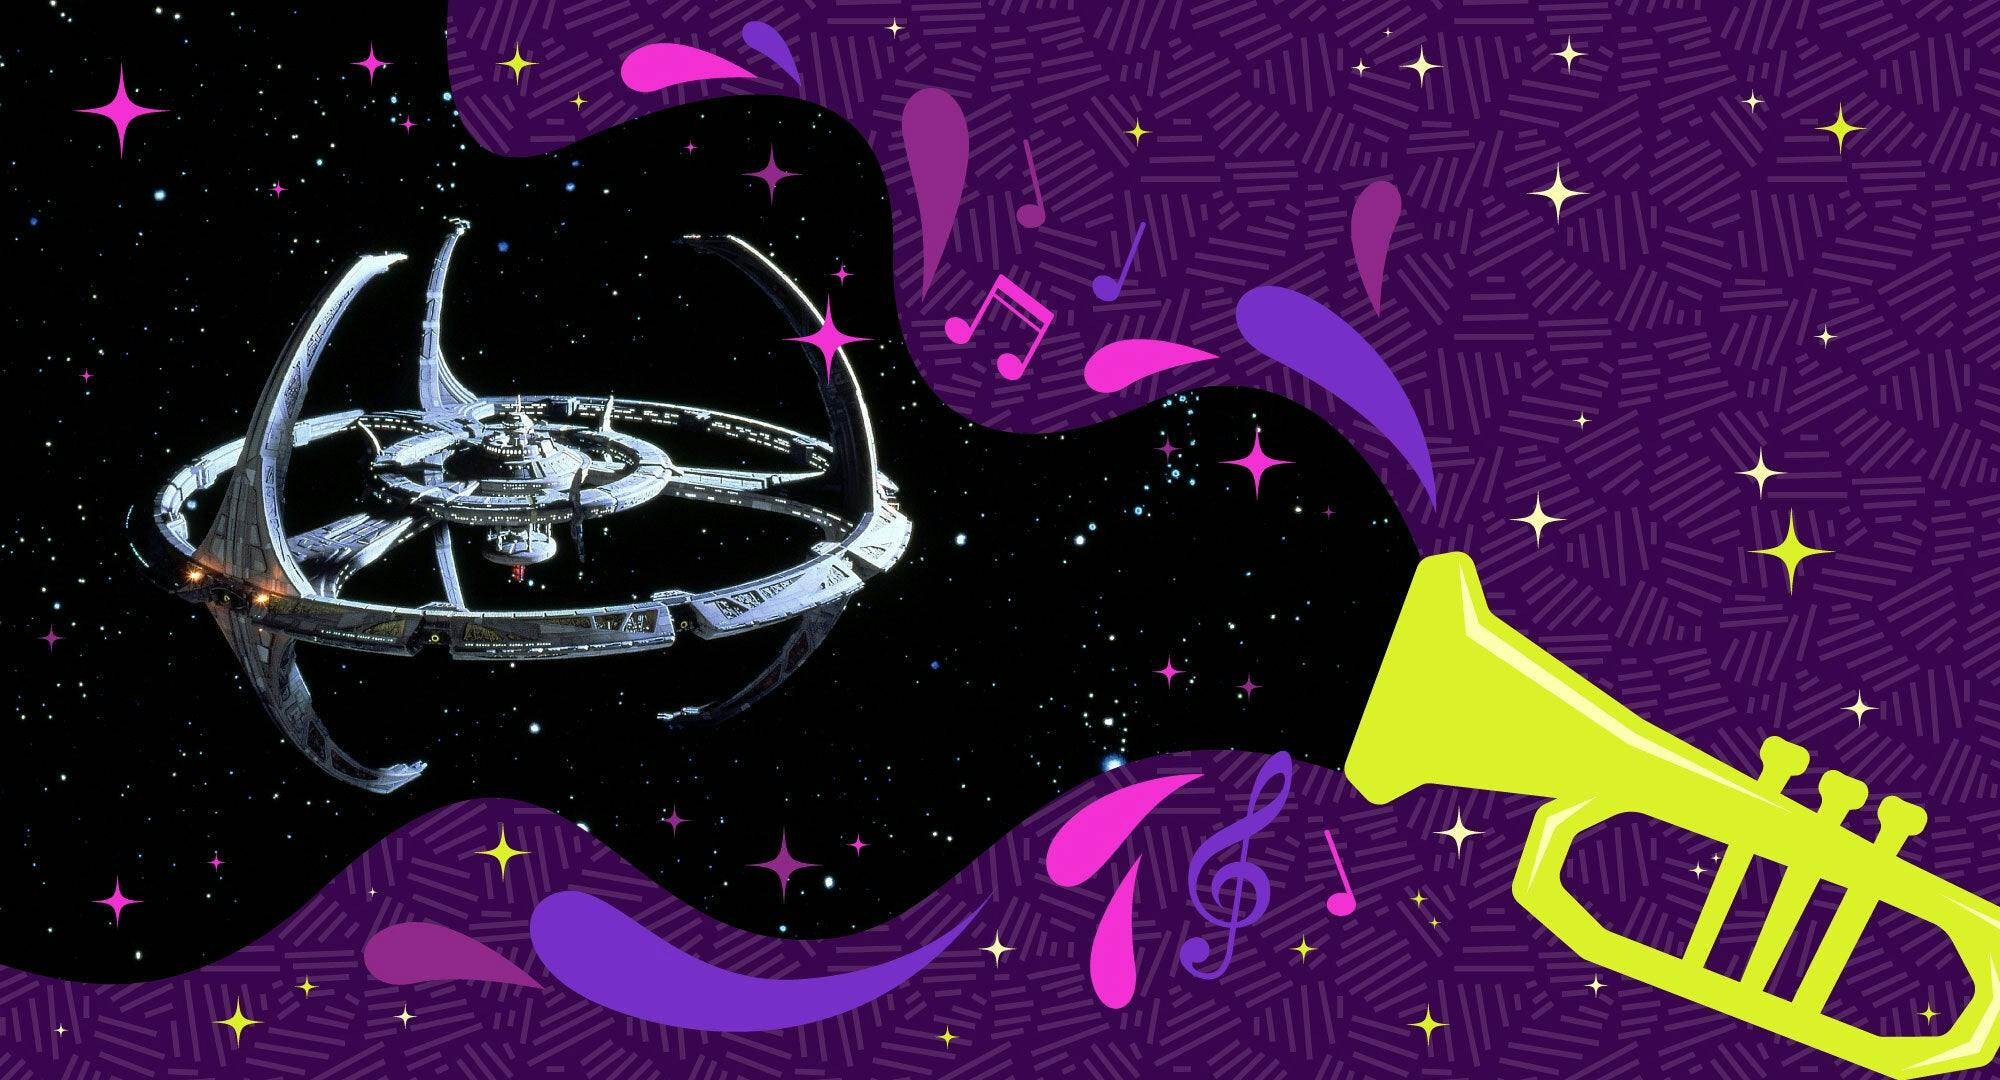 Illustrated banner of a trumpet with musical notes and the Deep Space 9 space station emerging from it